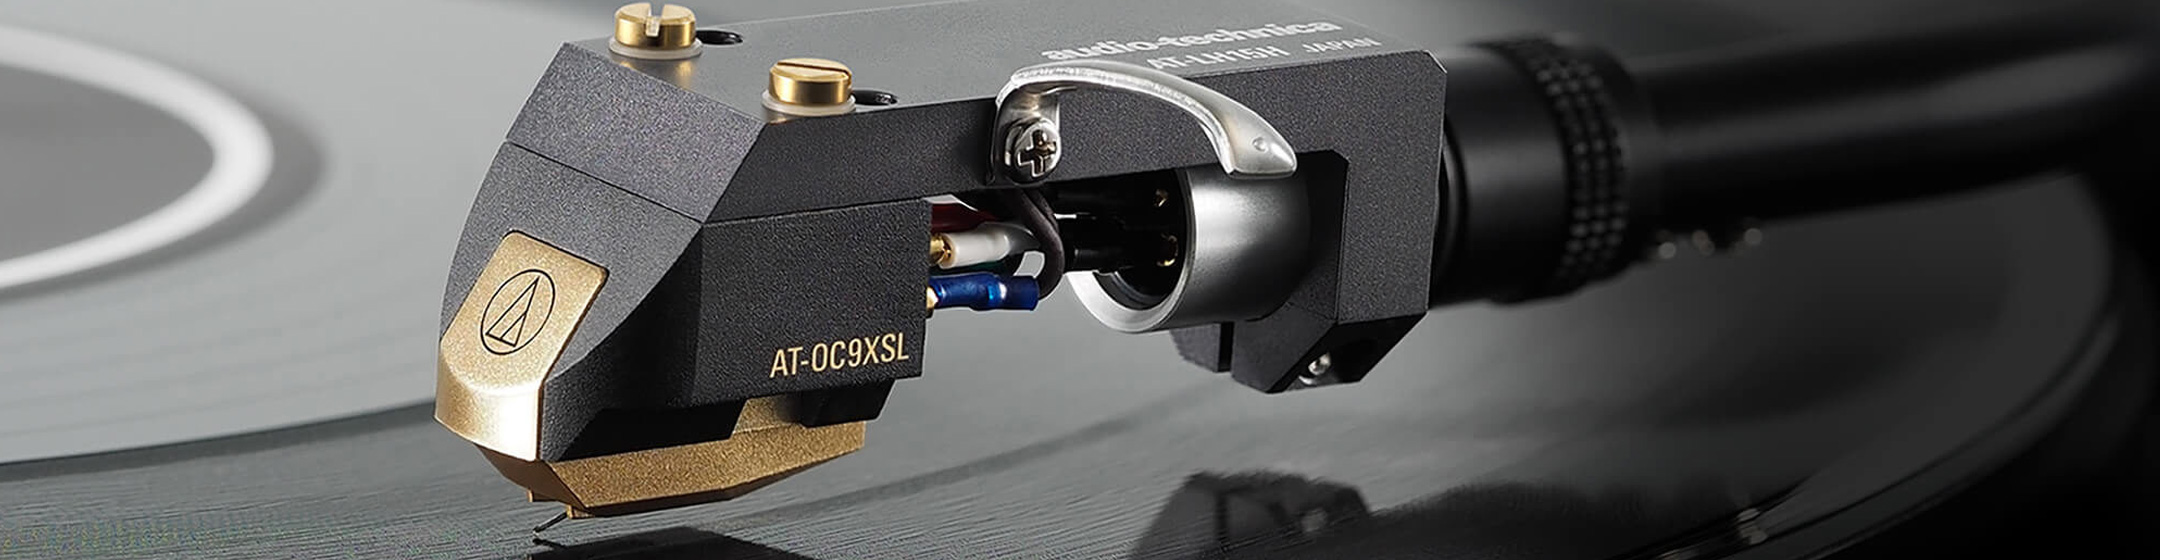 Pic showing an Audio-Technica cartridge on a tone arm playing a vinyl records